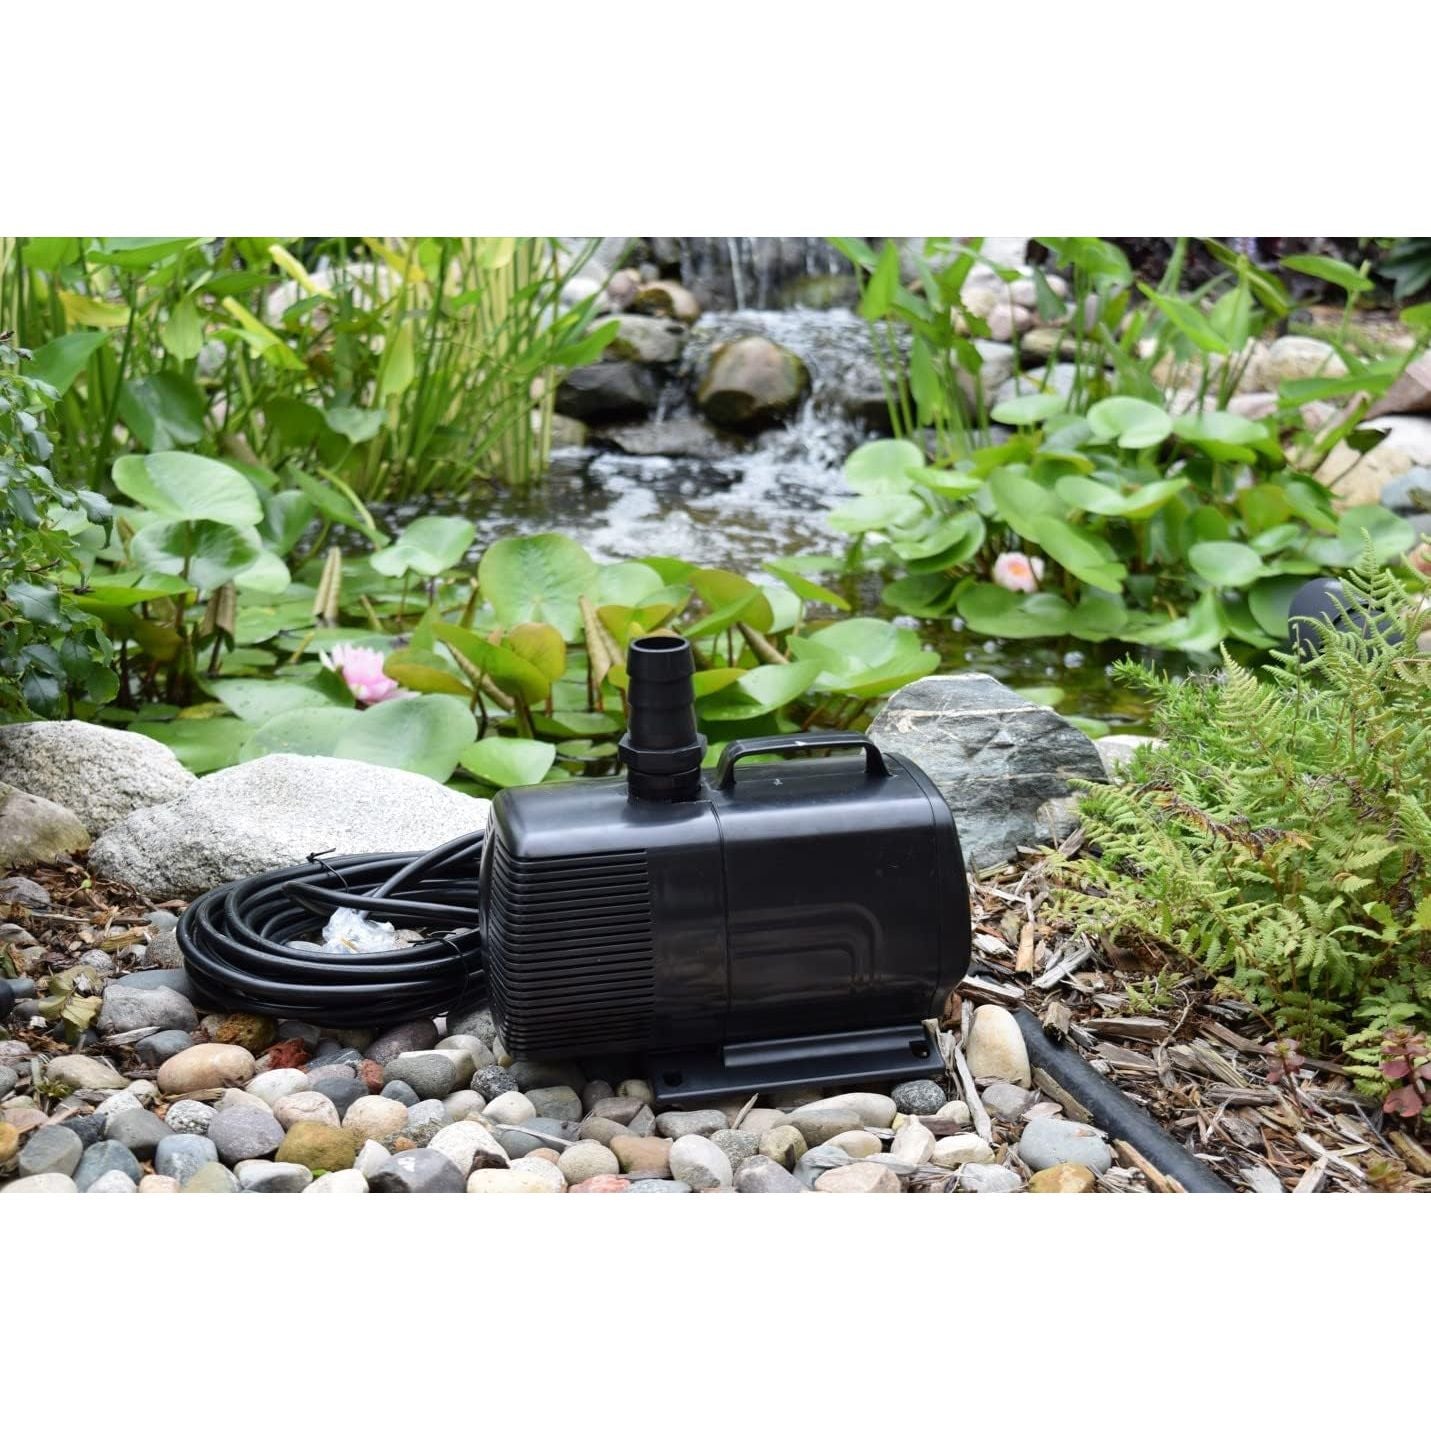 Efficient and Quiet Submersible Mag Drive Pump - 1750 GPH | EasyPro Pumps - American Pond Supplies Easy Pro Mag Drive Pumps Mag Drive Pumps